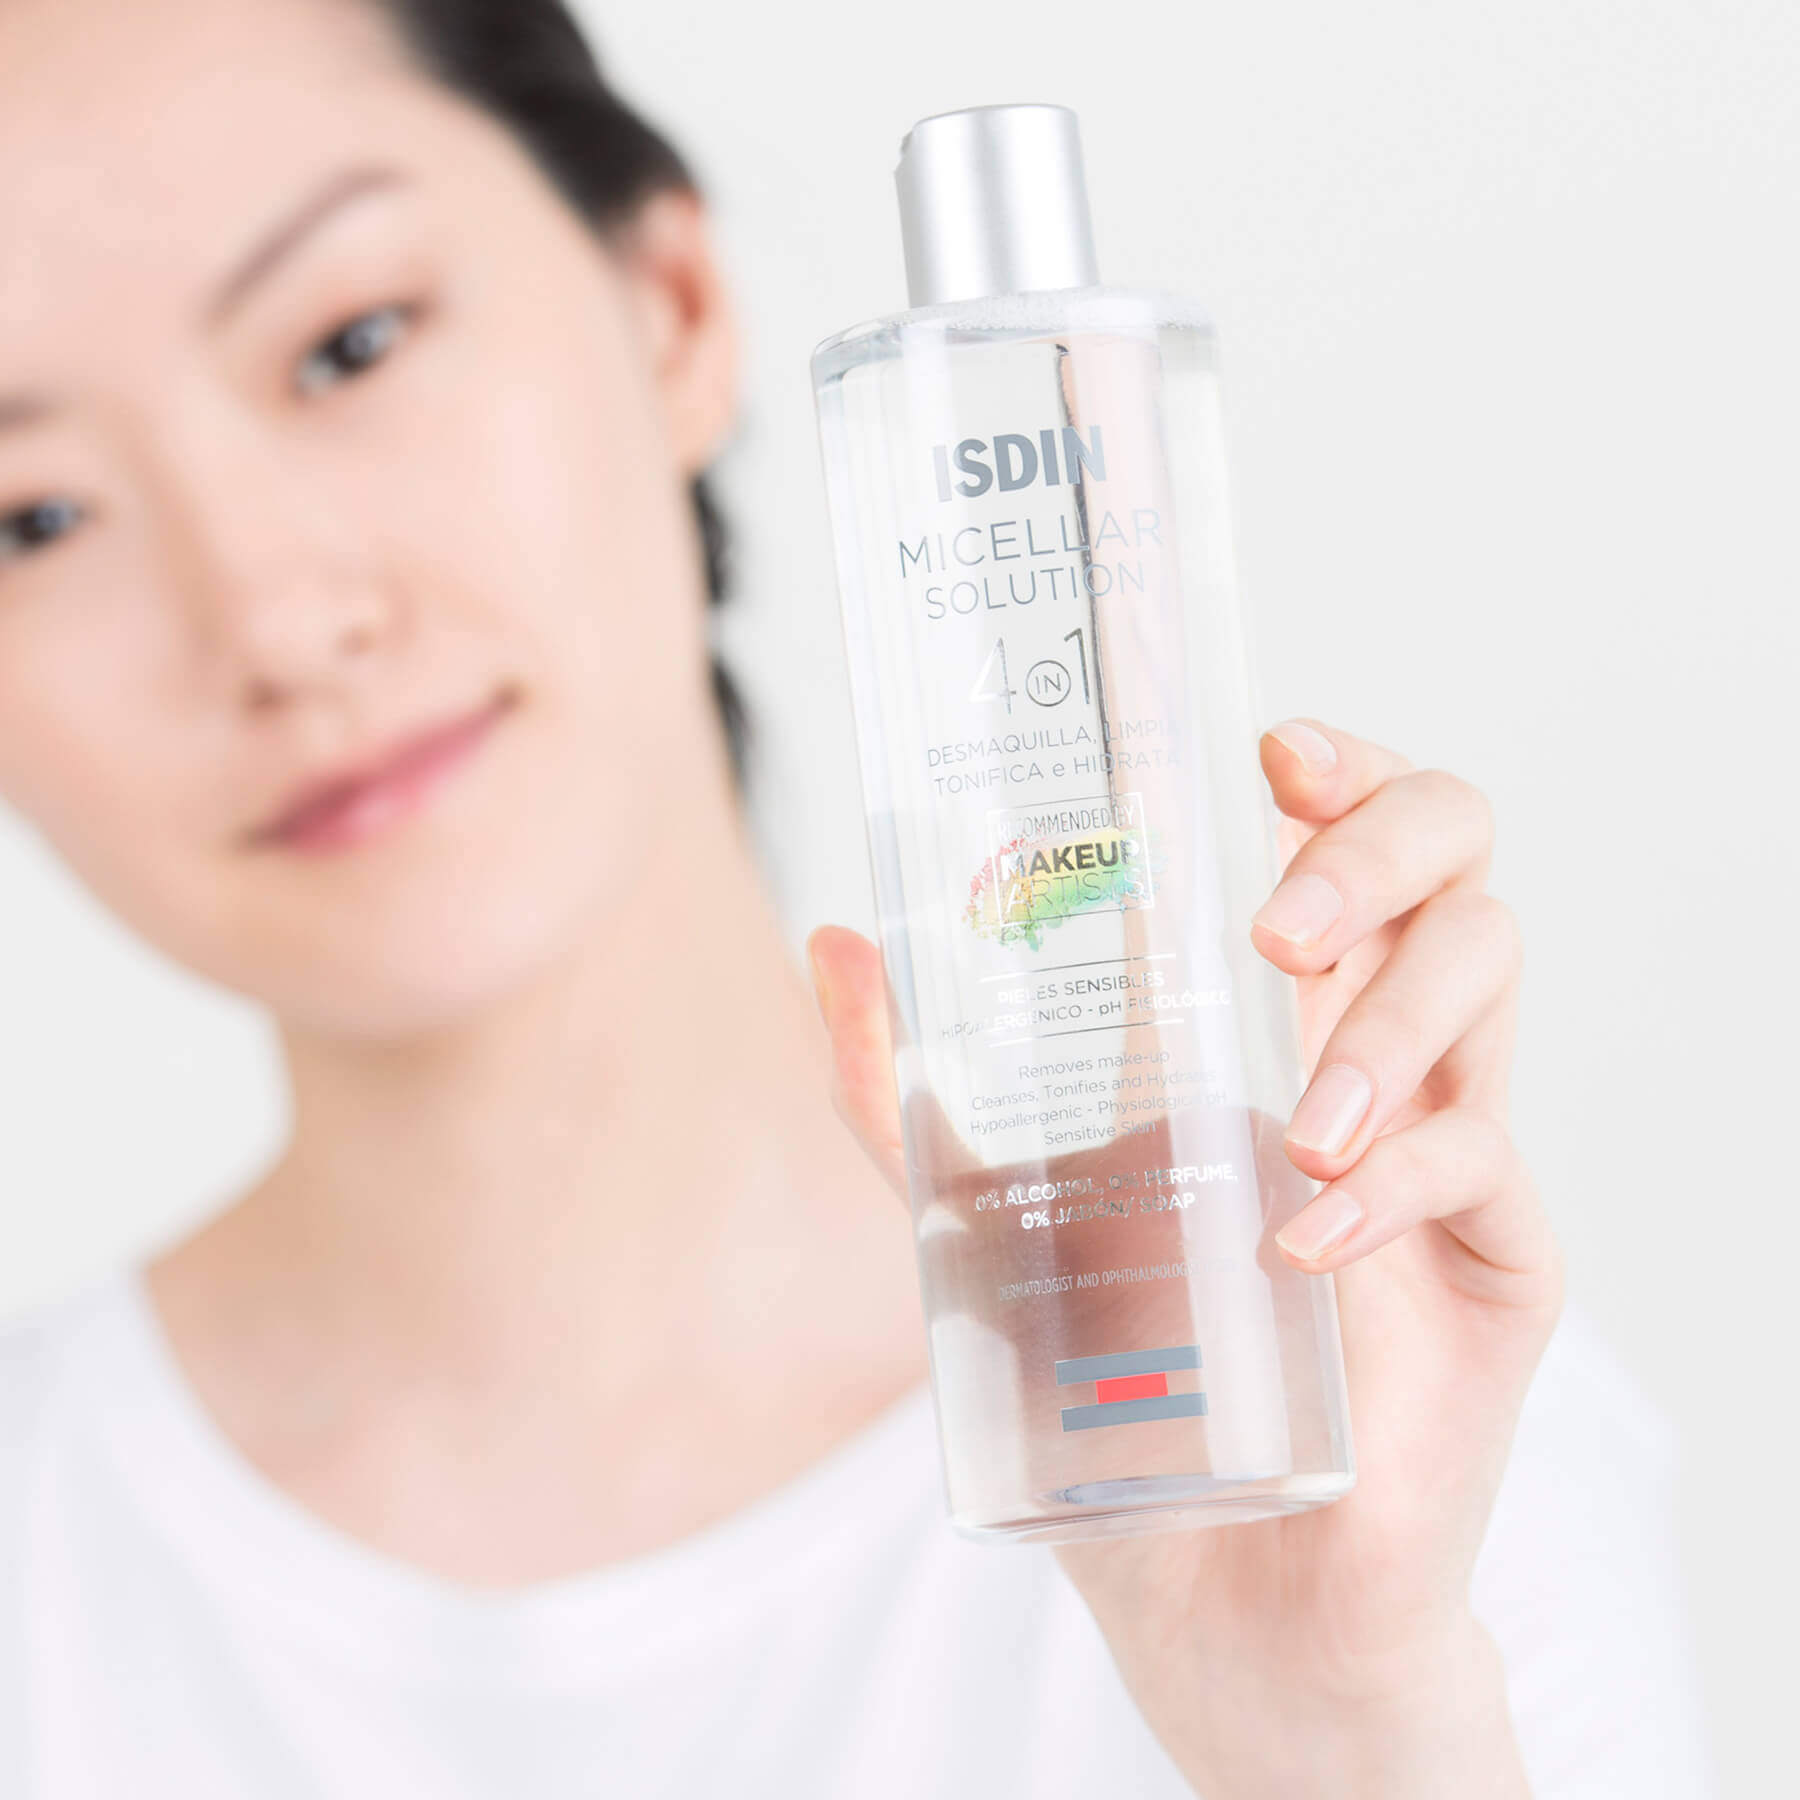 Micellar Cleansing Solution